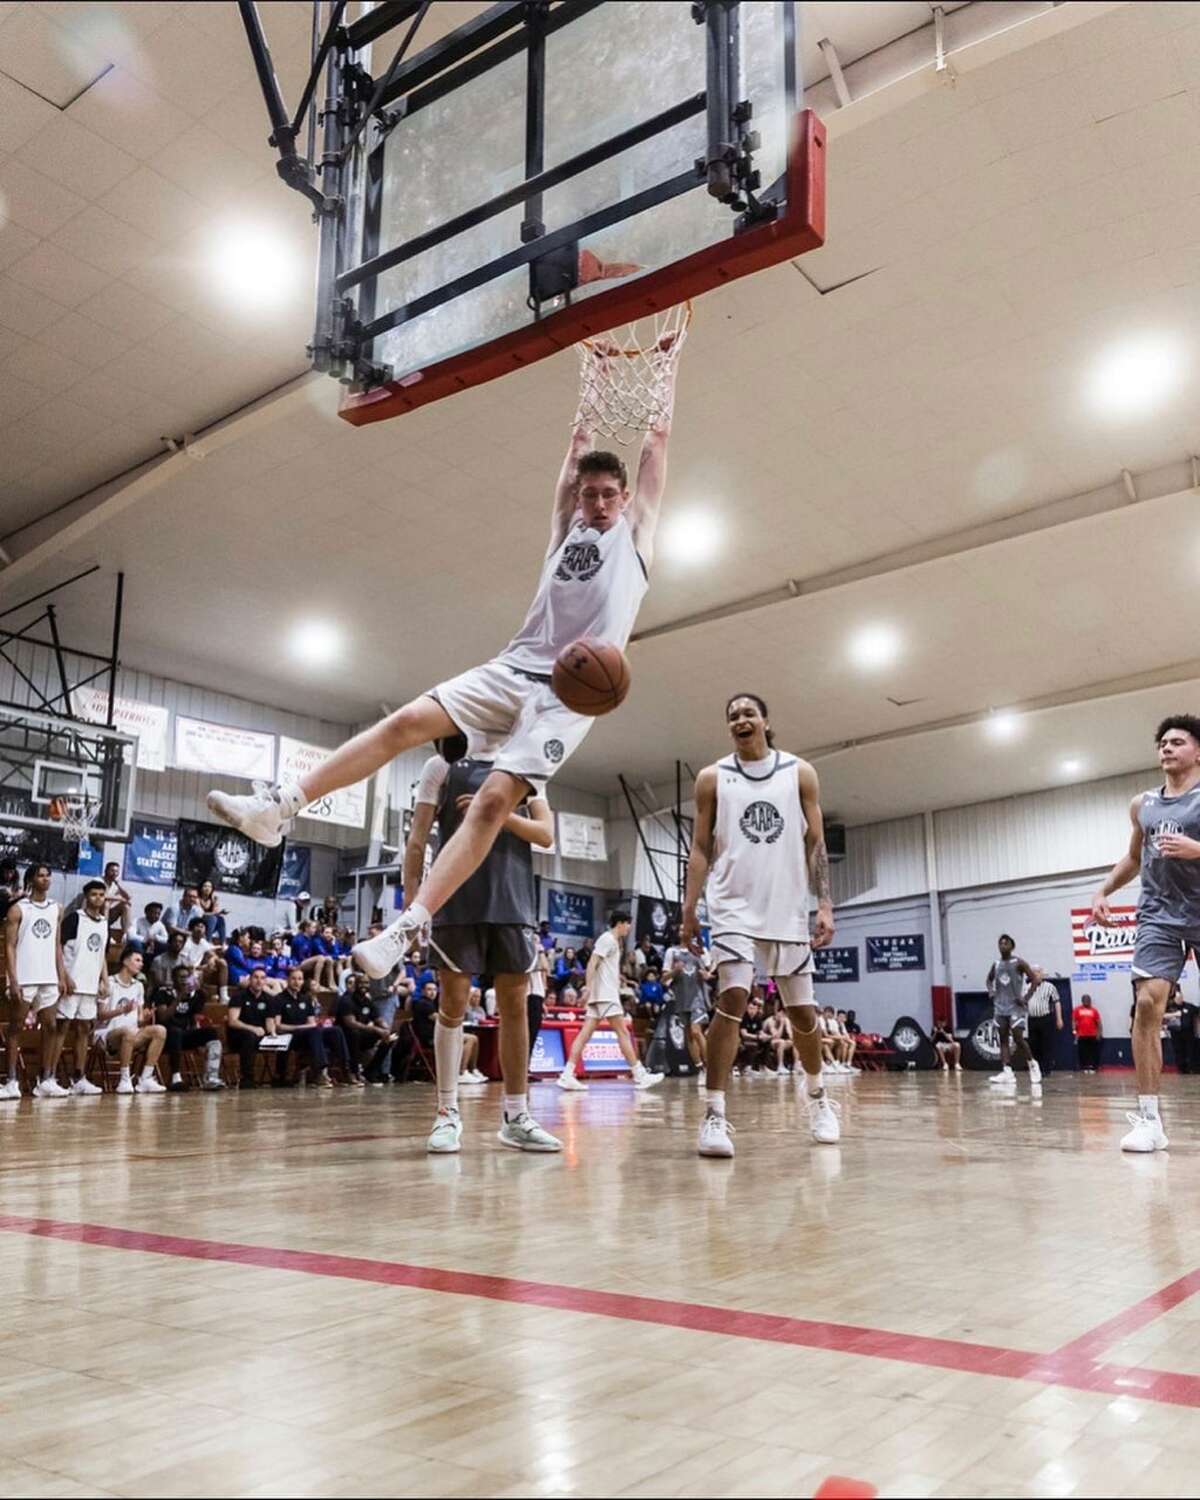 Jack Margoupis, a 6-foot-8 forward, is "pretty sneaky around the rim in terms of his athleticism and being able to dunk on people," according to Cushing Academy coach James Cormier.